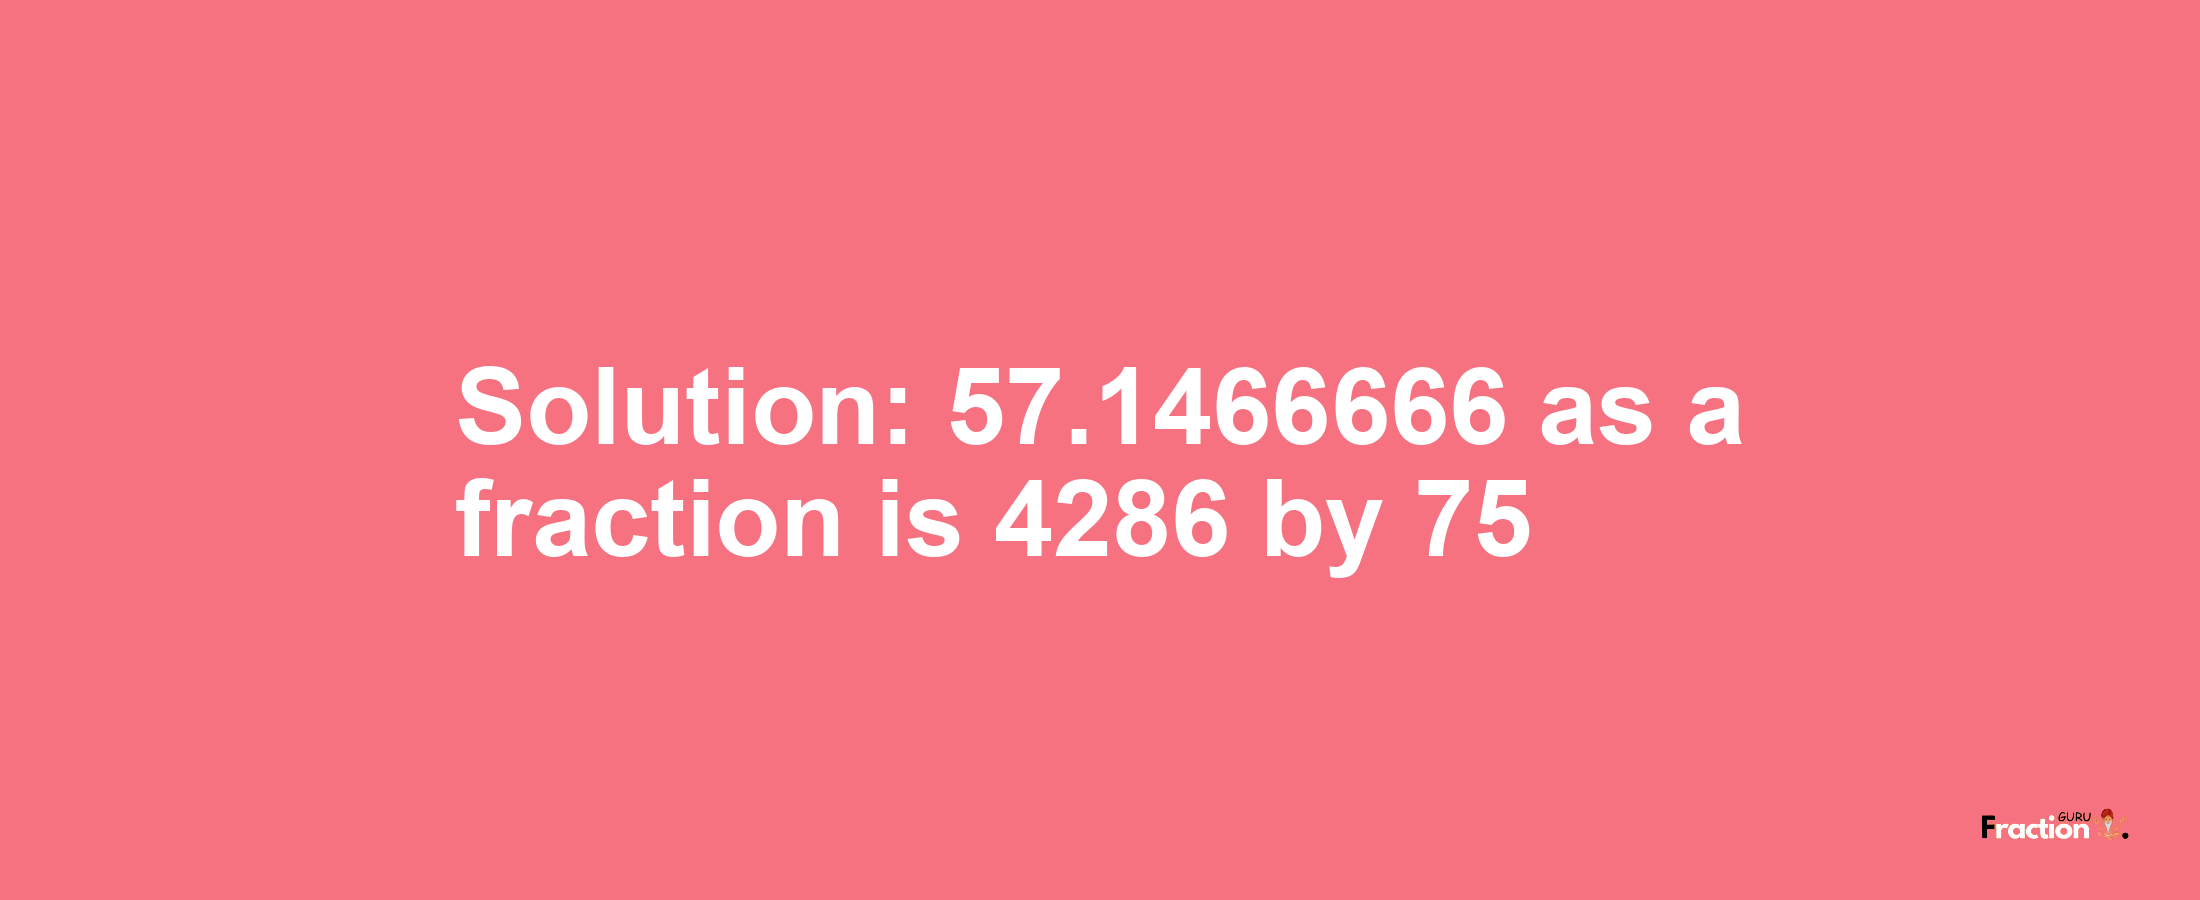 Solution:57.1466666 as a fraction is 4286/75